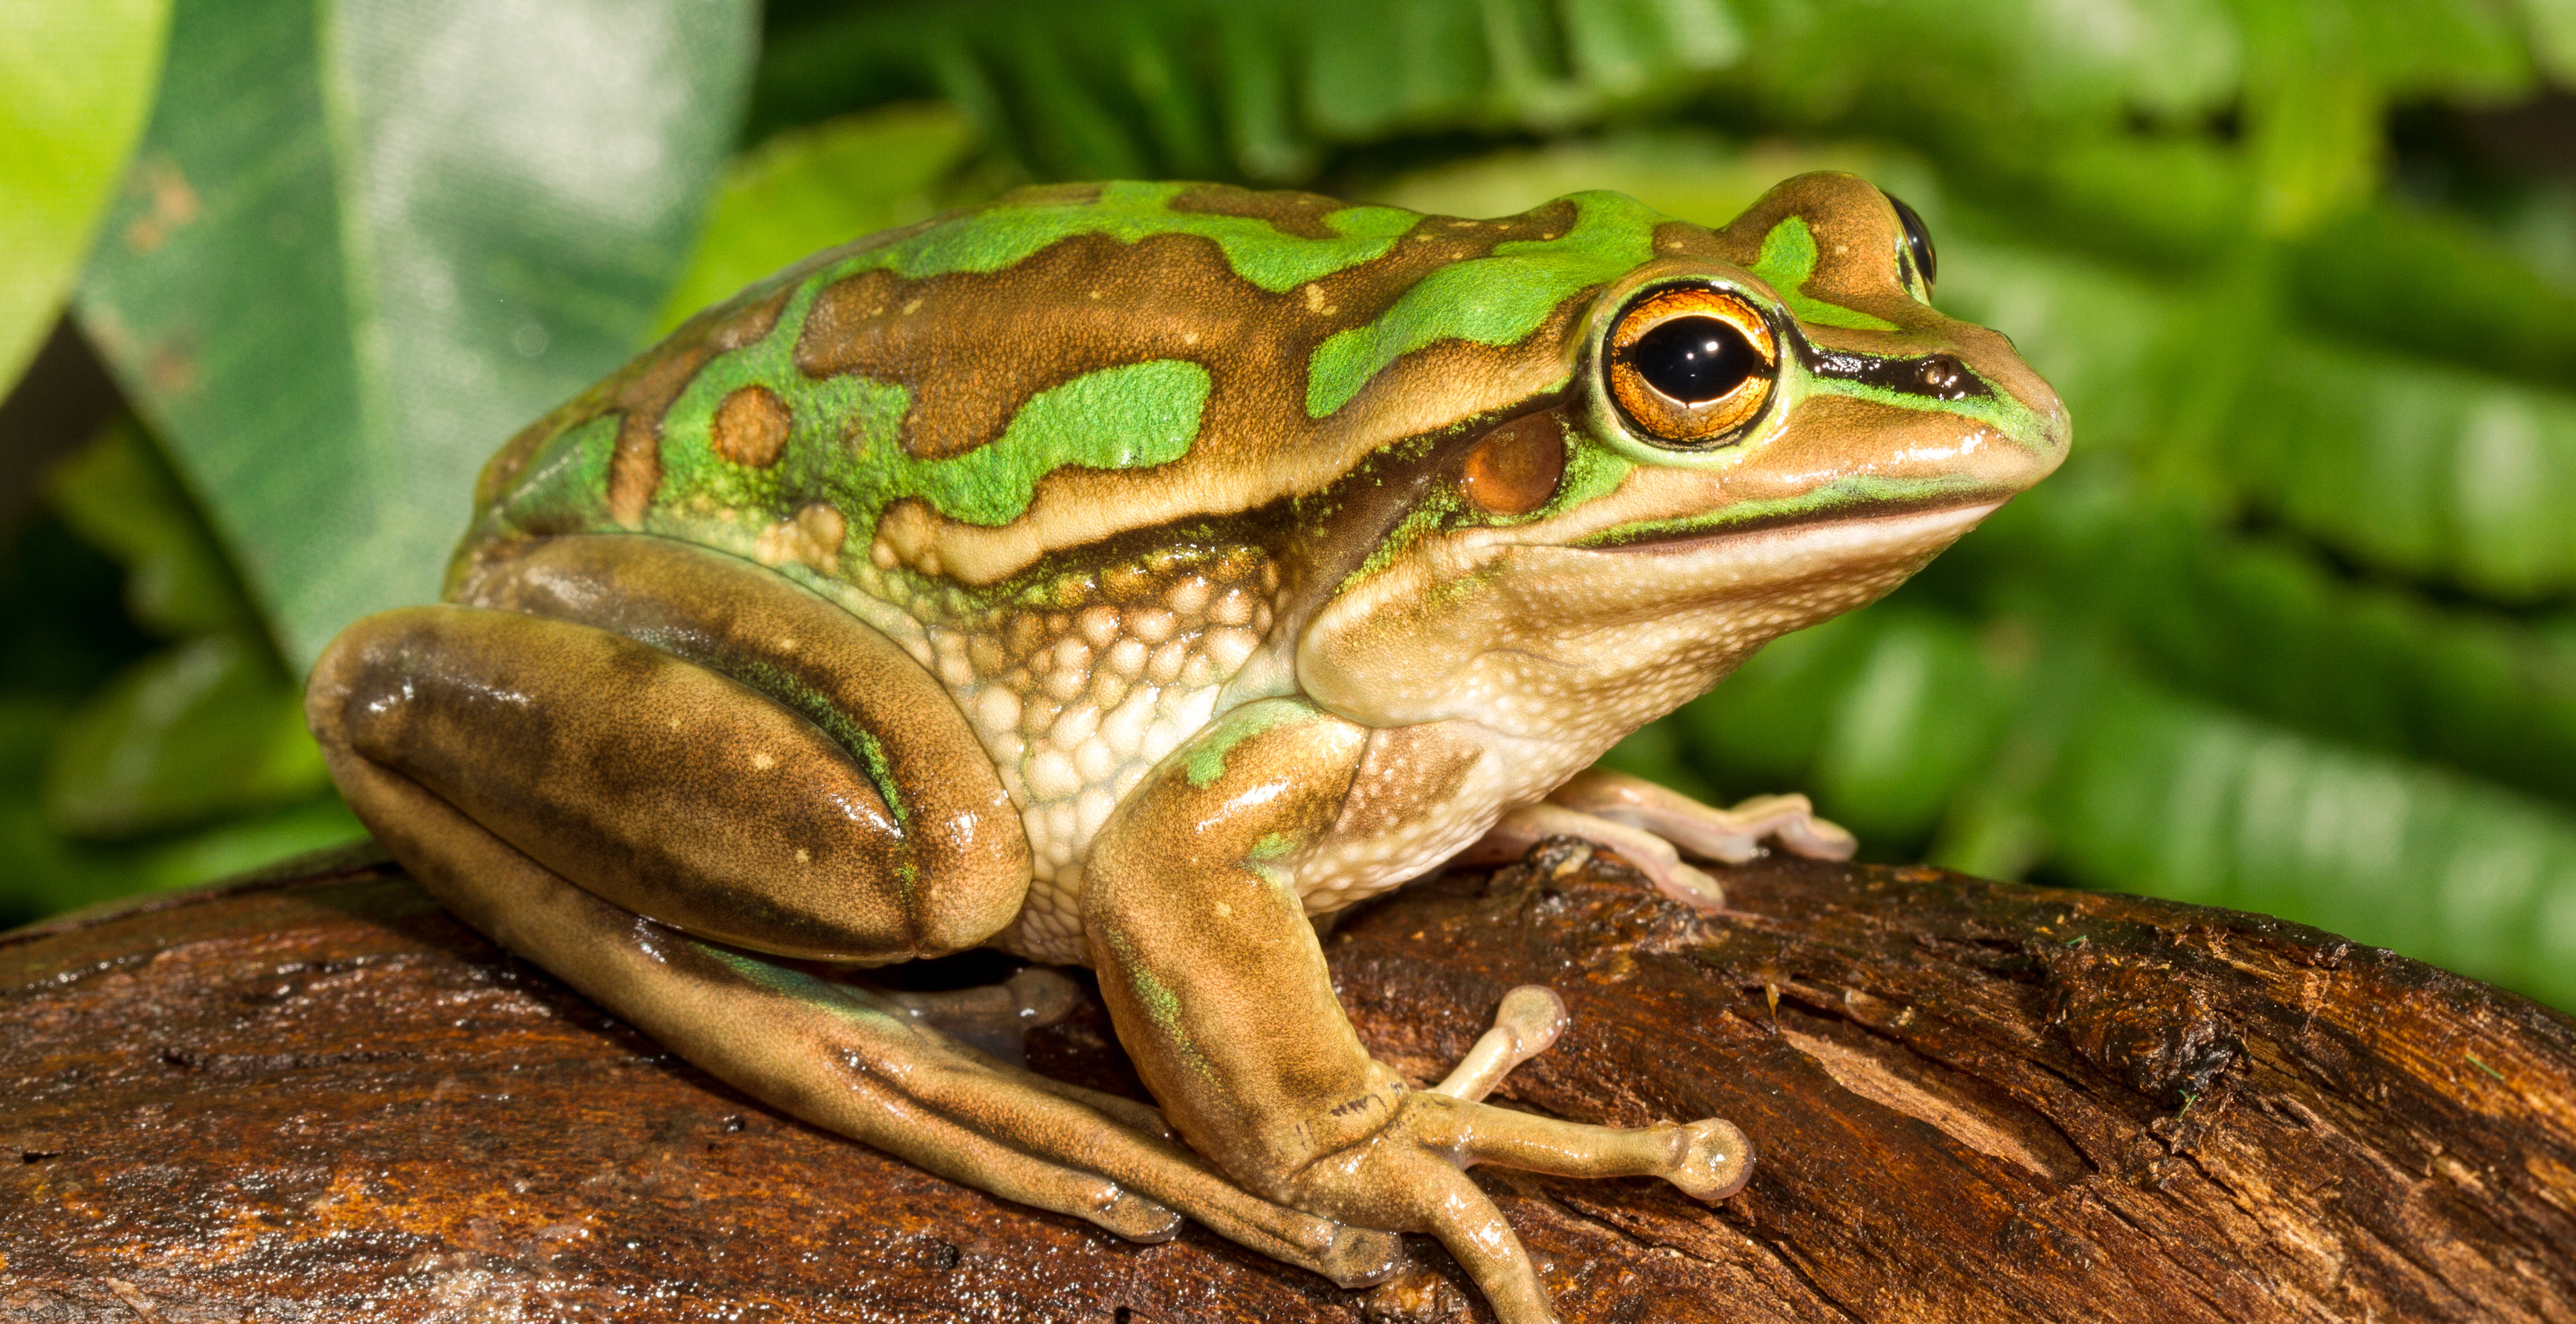 Theory Suggests Female Frogs May Eat Male Frogs After Mating